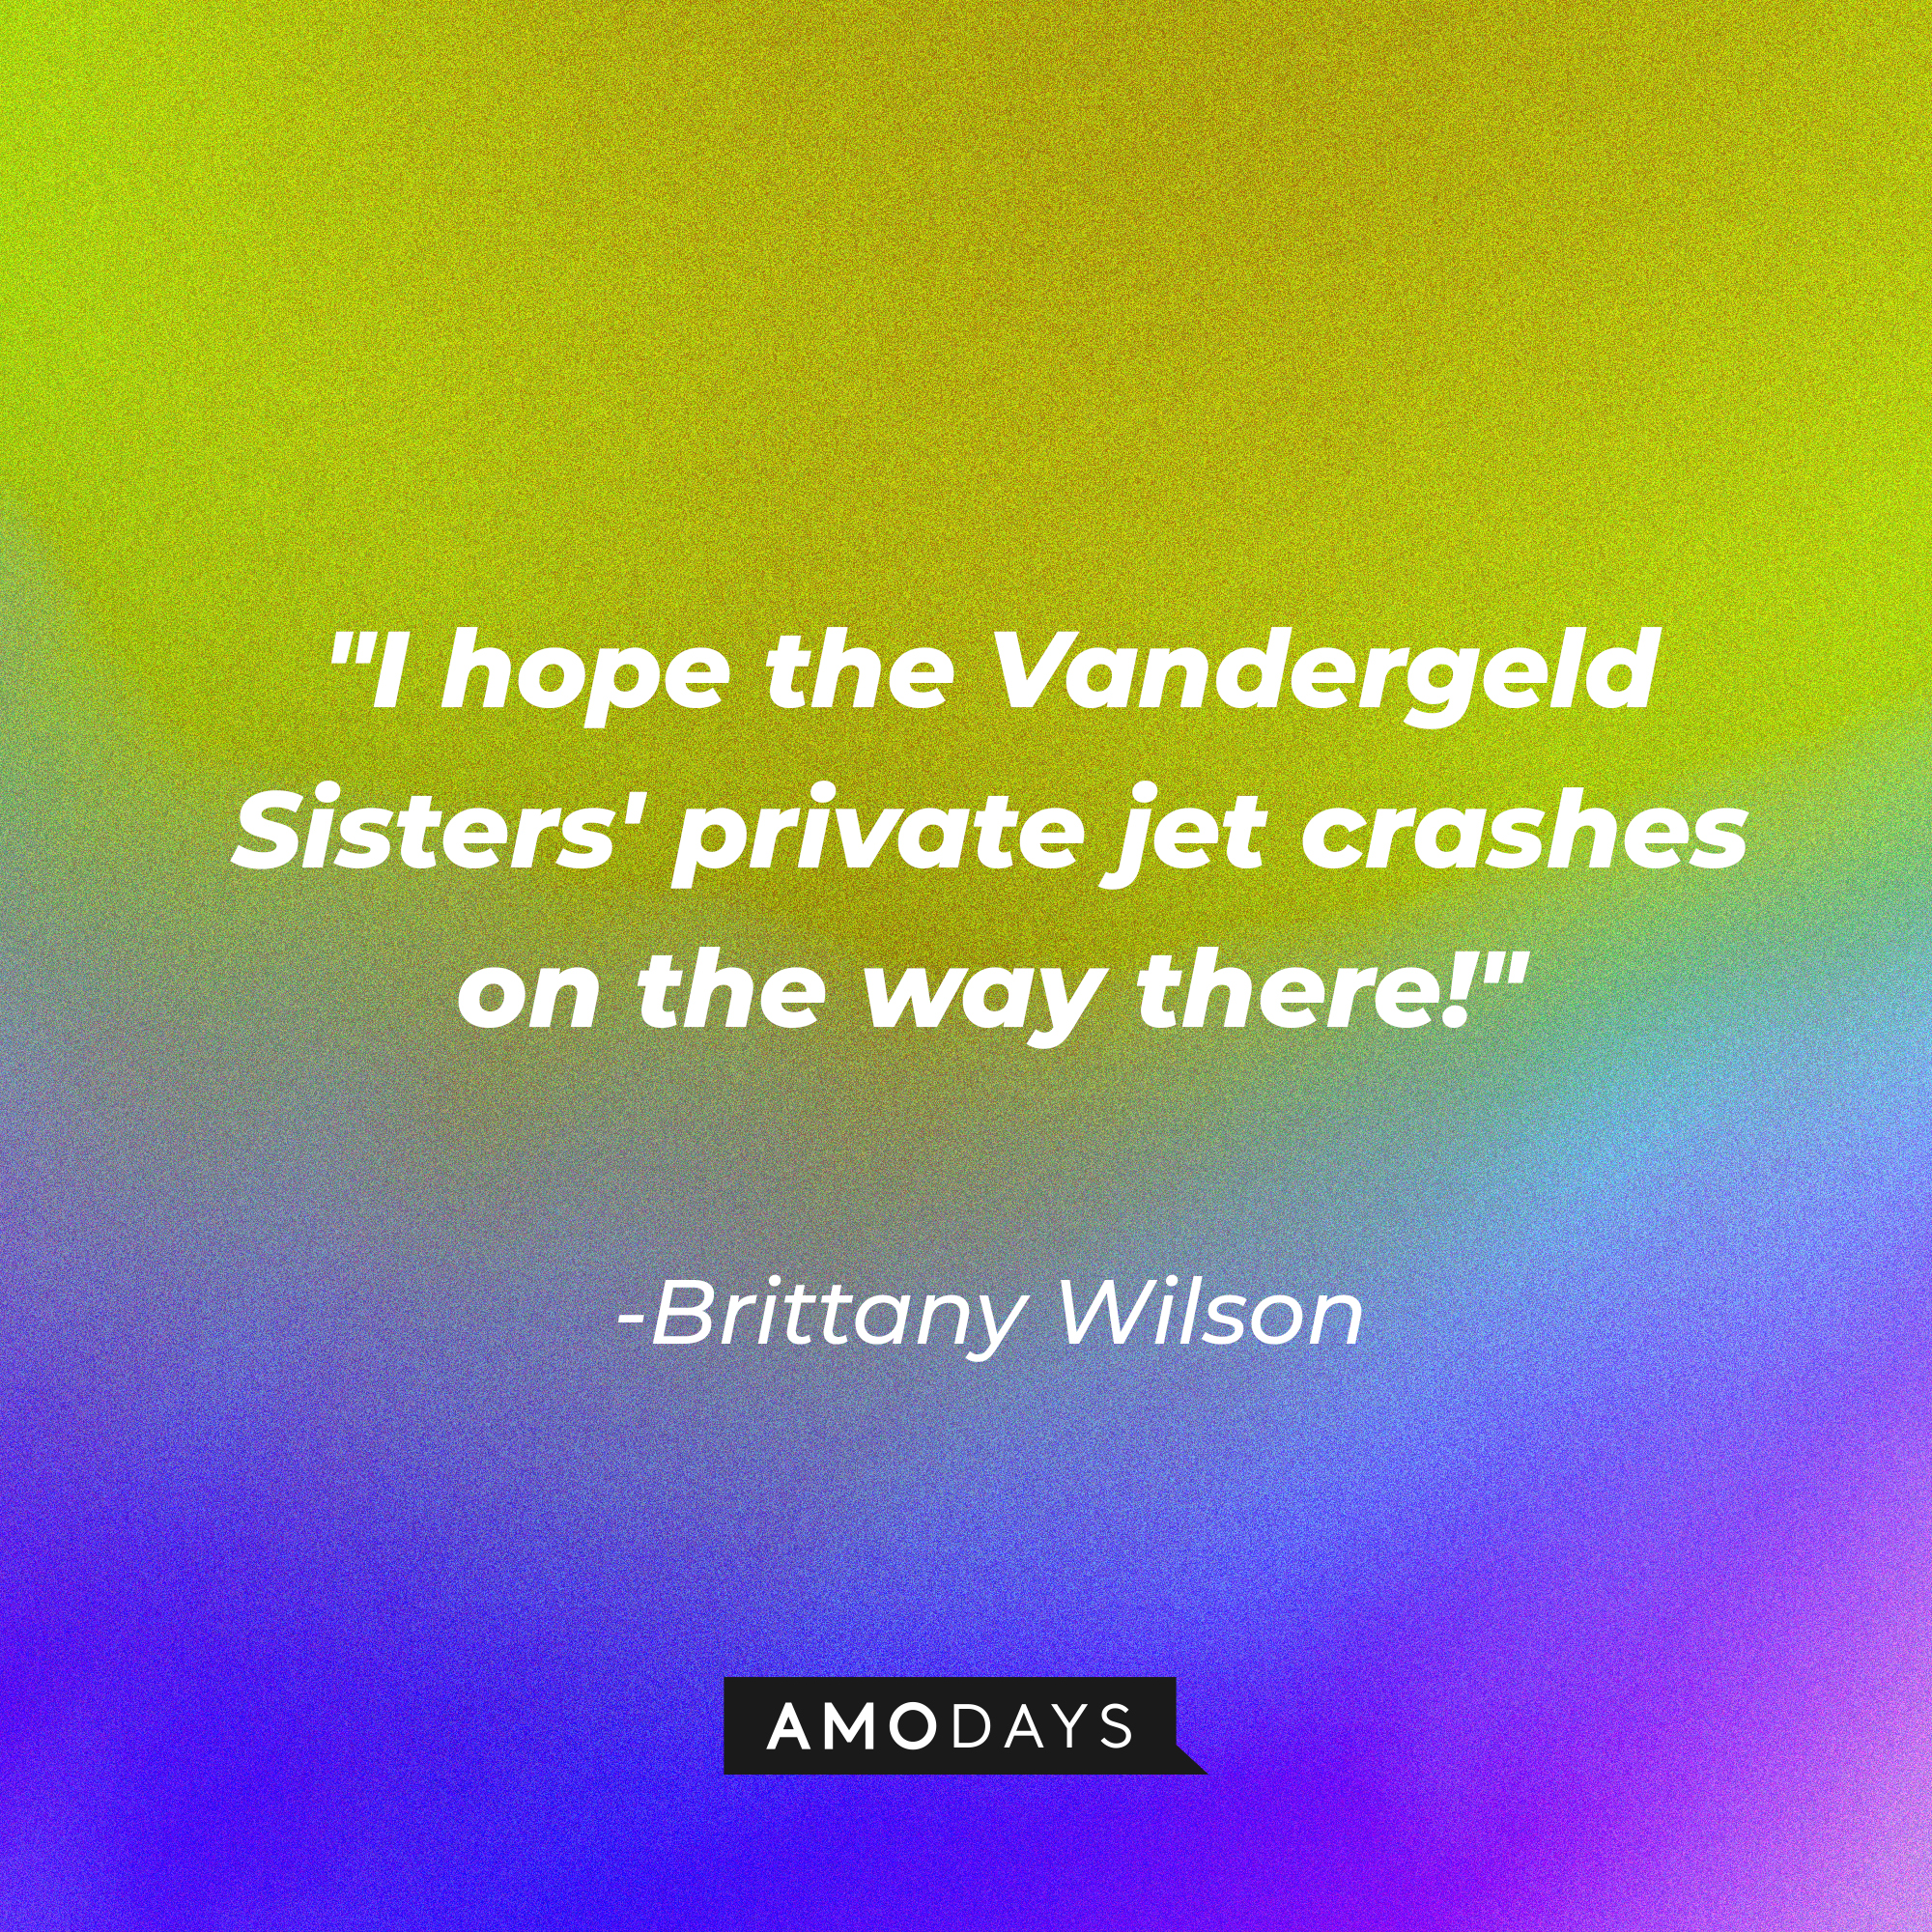 Brittany Wilson's quote: "I hope the Vandergeld Sisters' private jet crashes on the way there!" | Source: Amodays